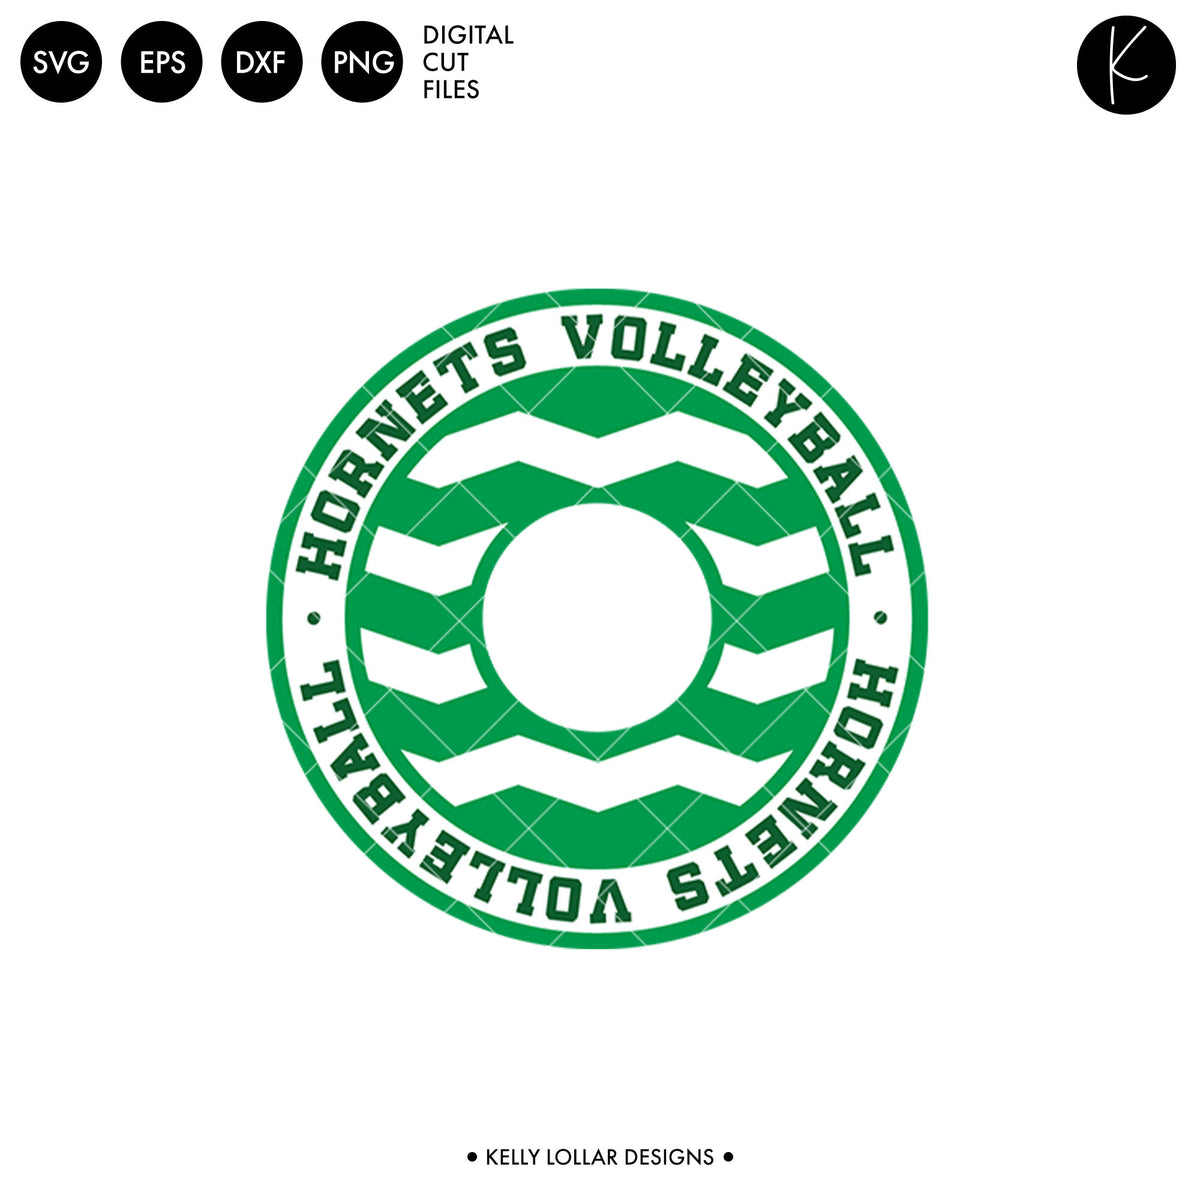 Hornets Volleyball Bundle | SVG DXF EPS PNG Cut Files